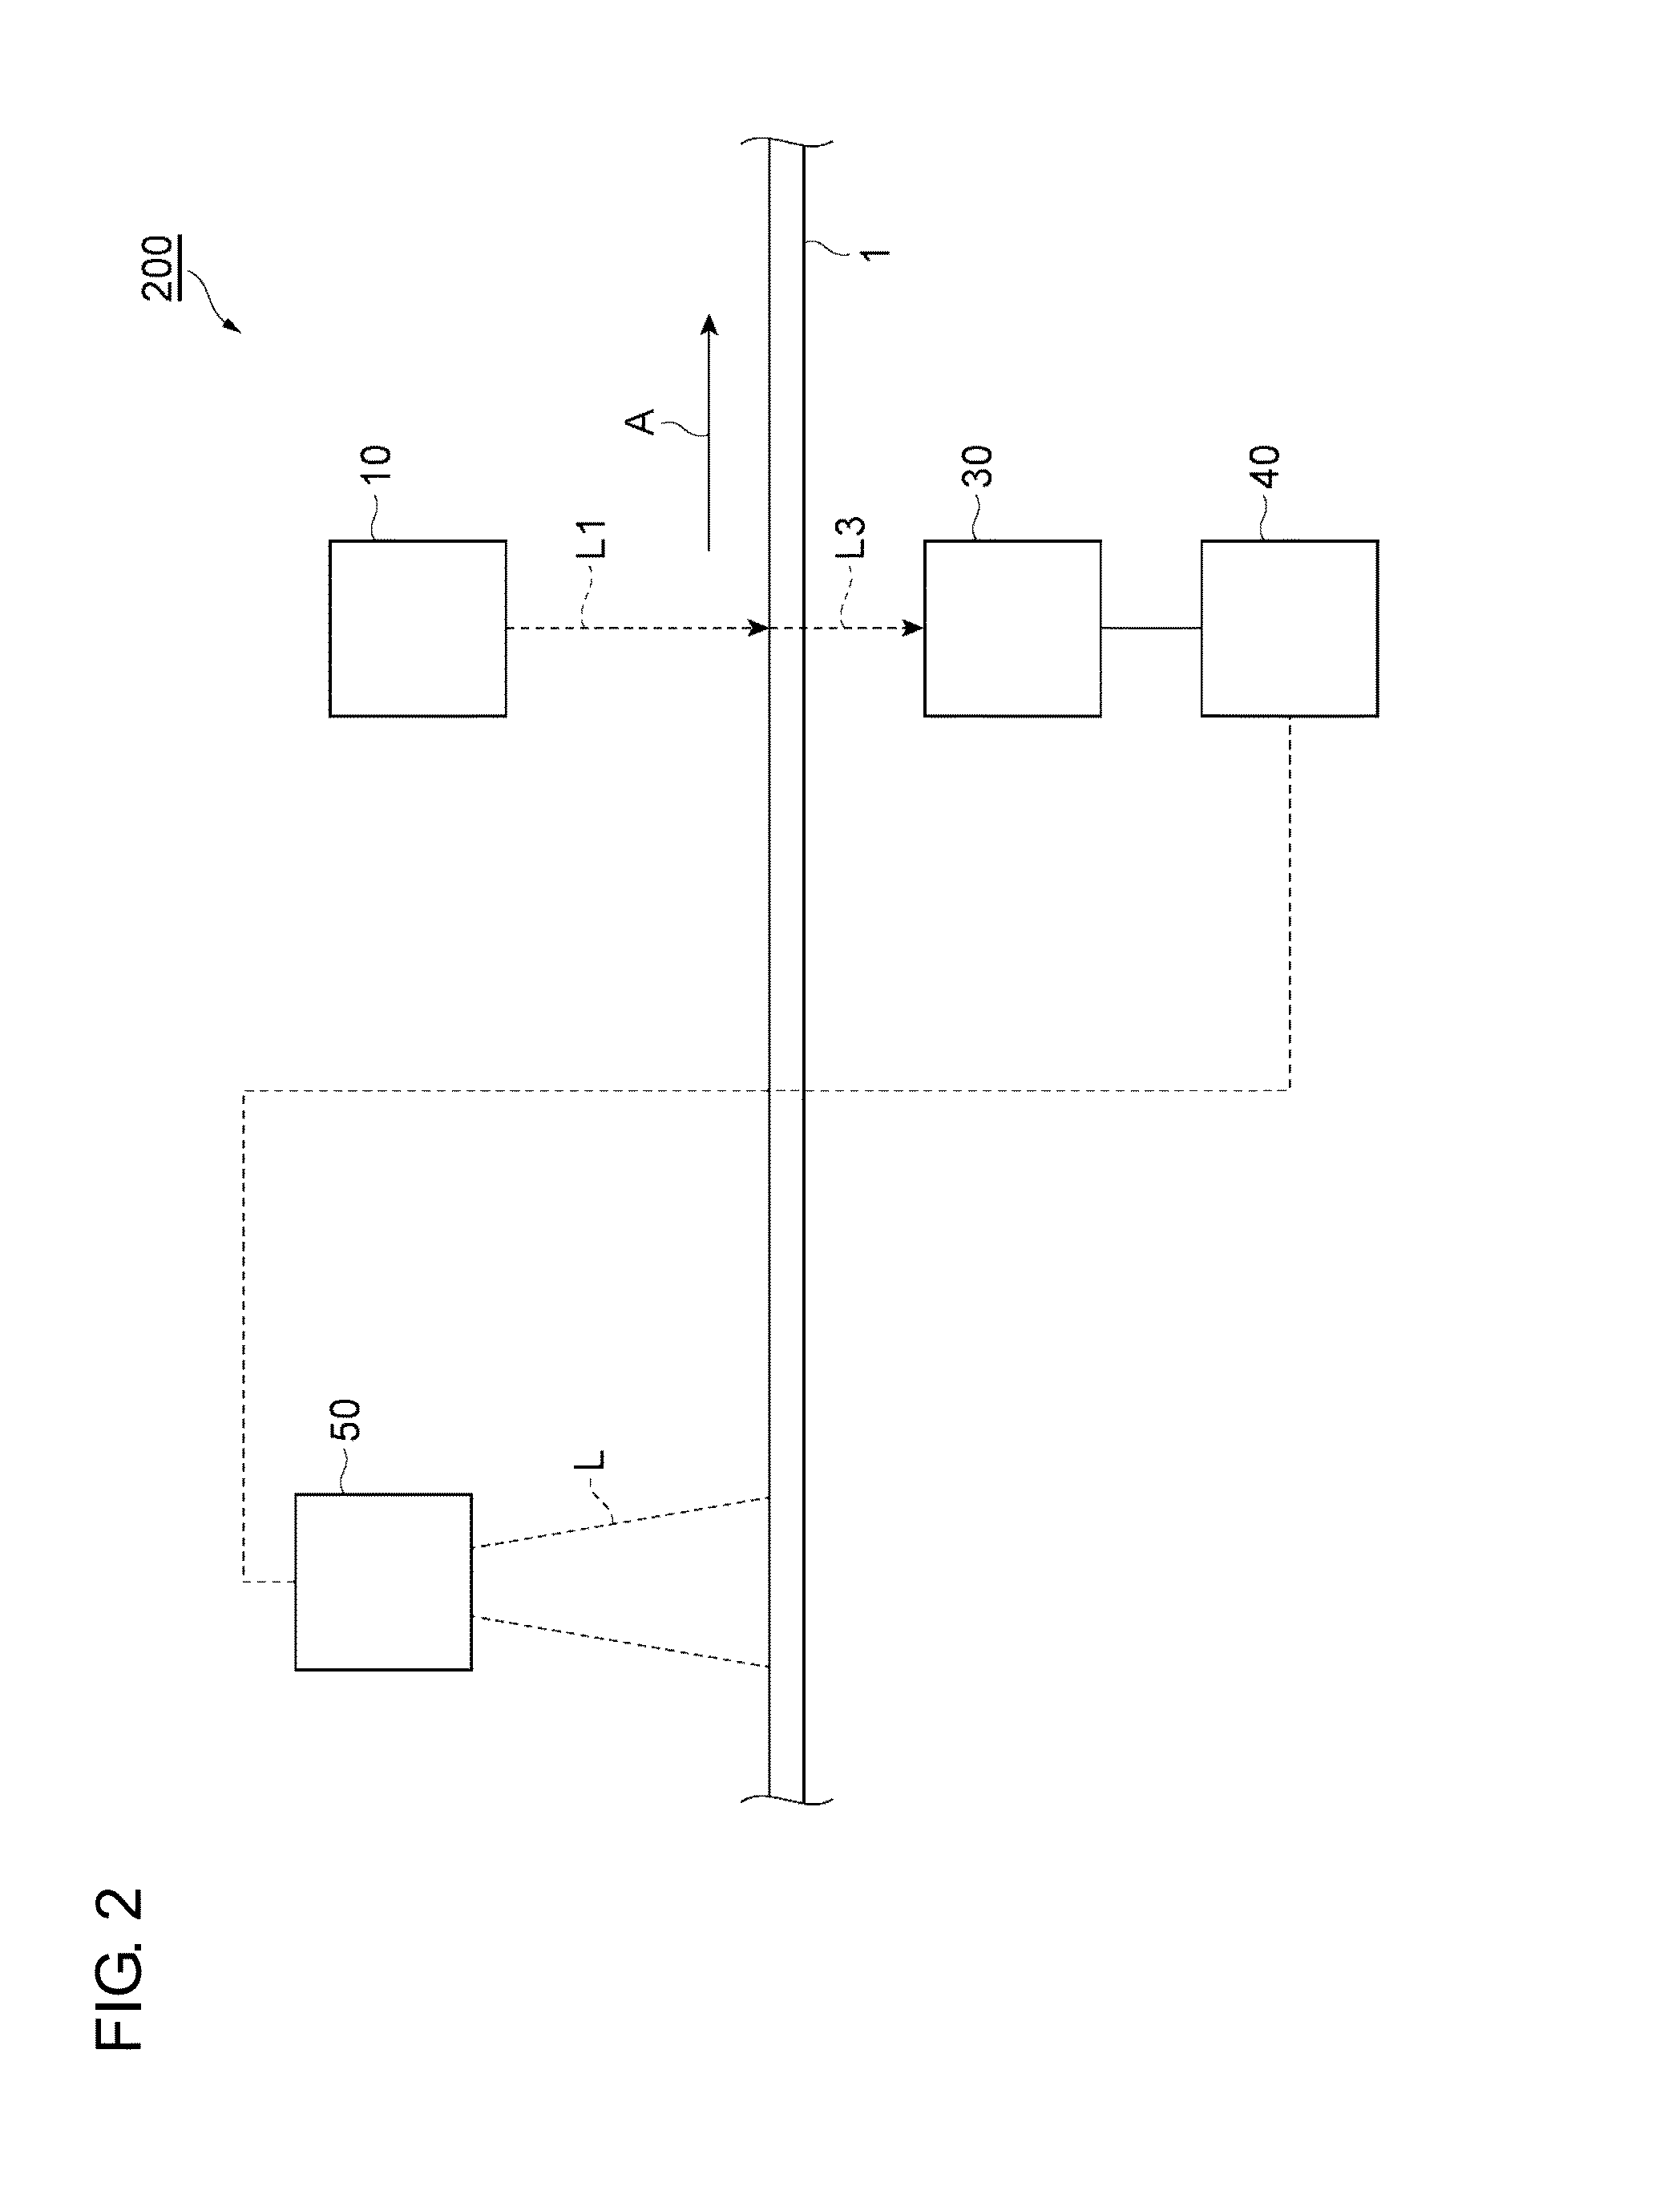 Method for manufacturing film, film-manufacturing process monitor device, and method for inspecting film